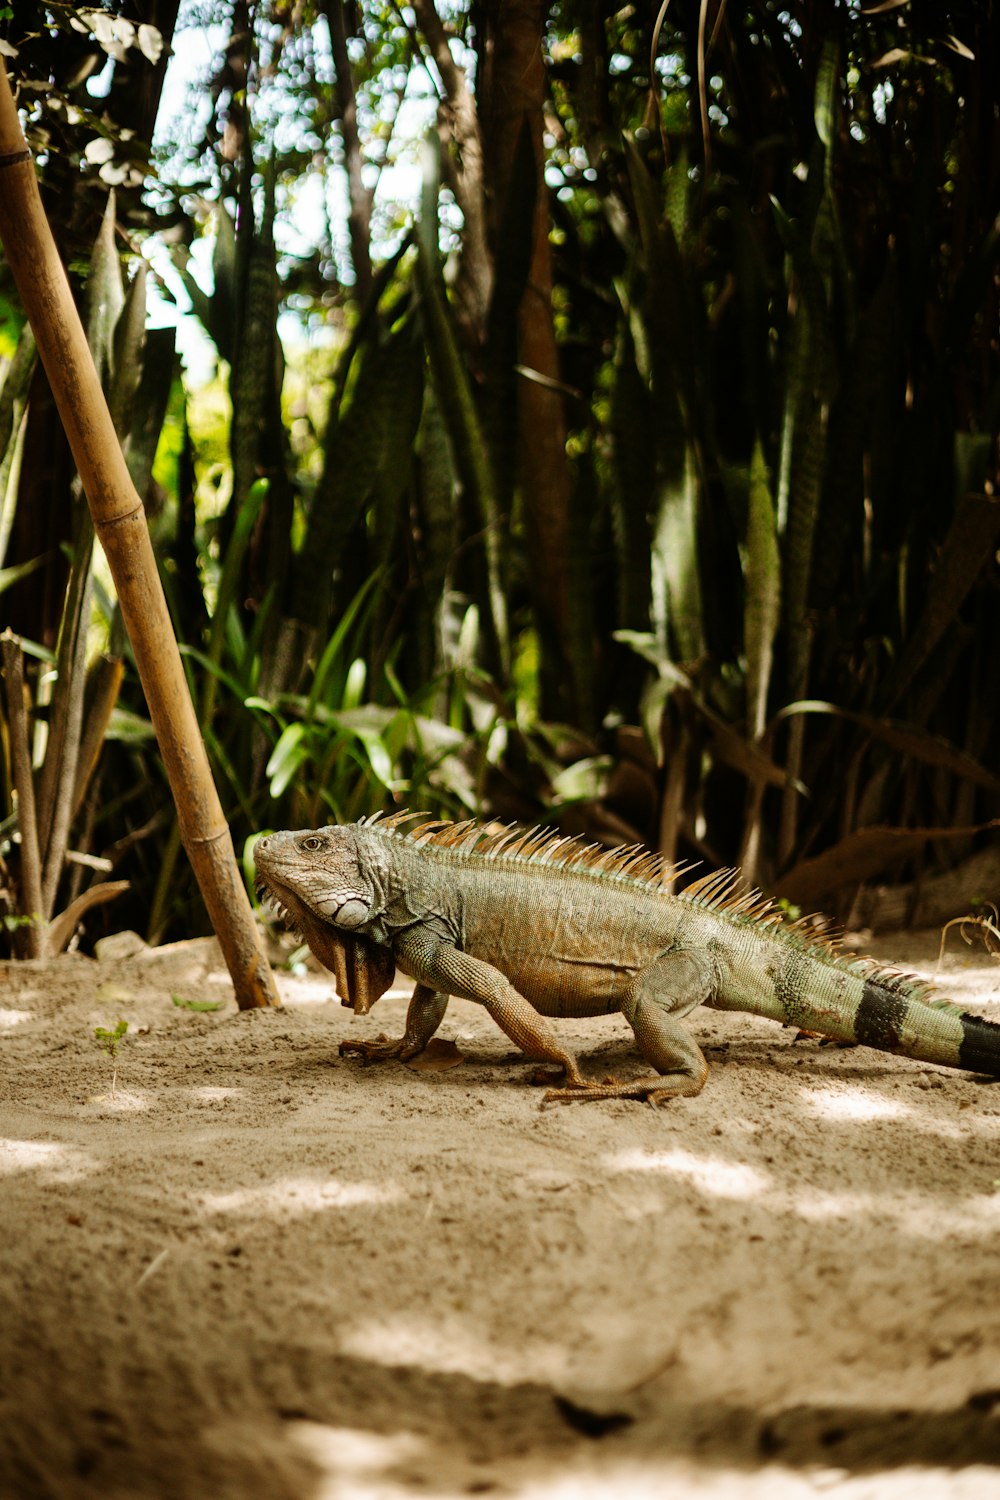 a large lizard in a forest